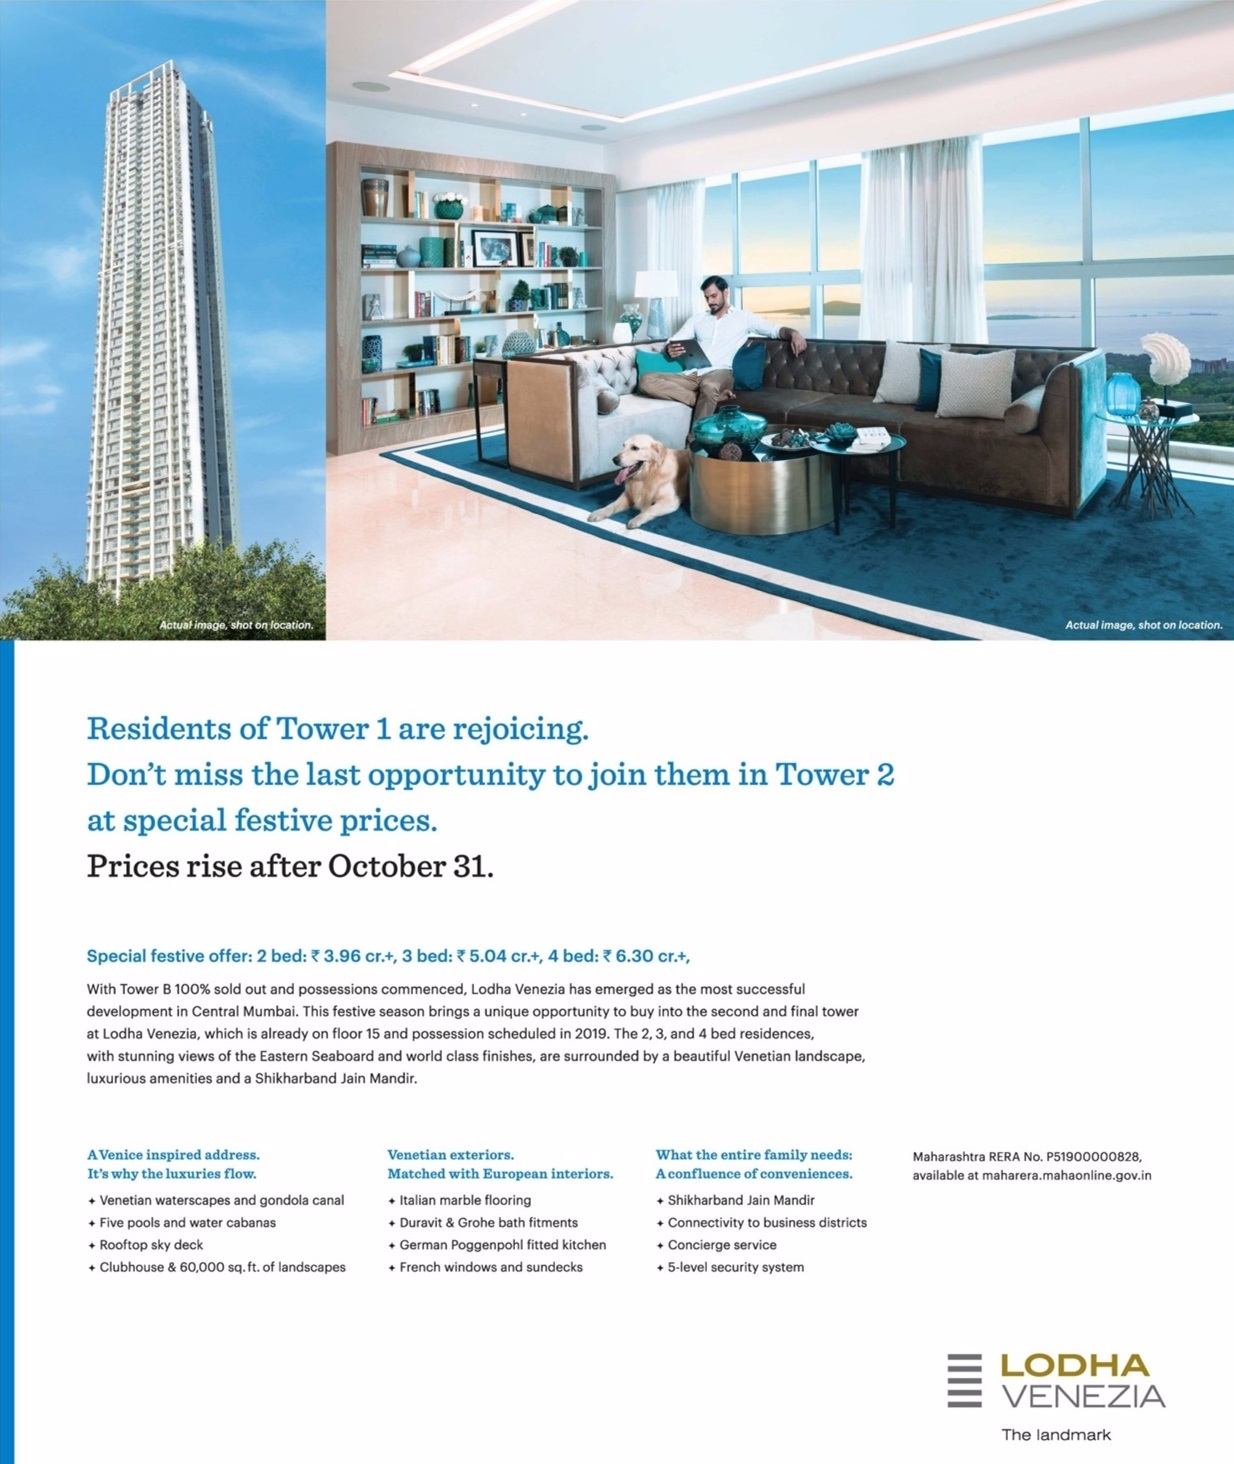 Residents of Tower 1 are rejoicing don't miss the last opportunity to join them in Tower 2 at Lodha Venezia, Mumbai Update